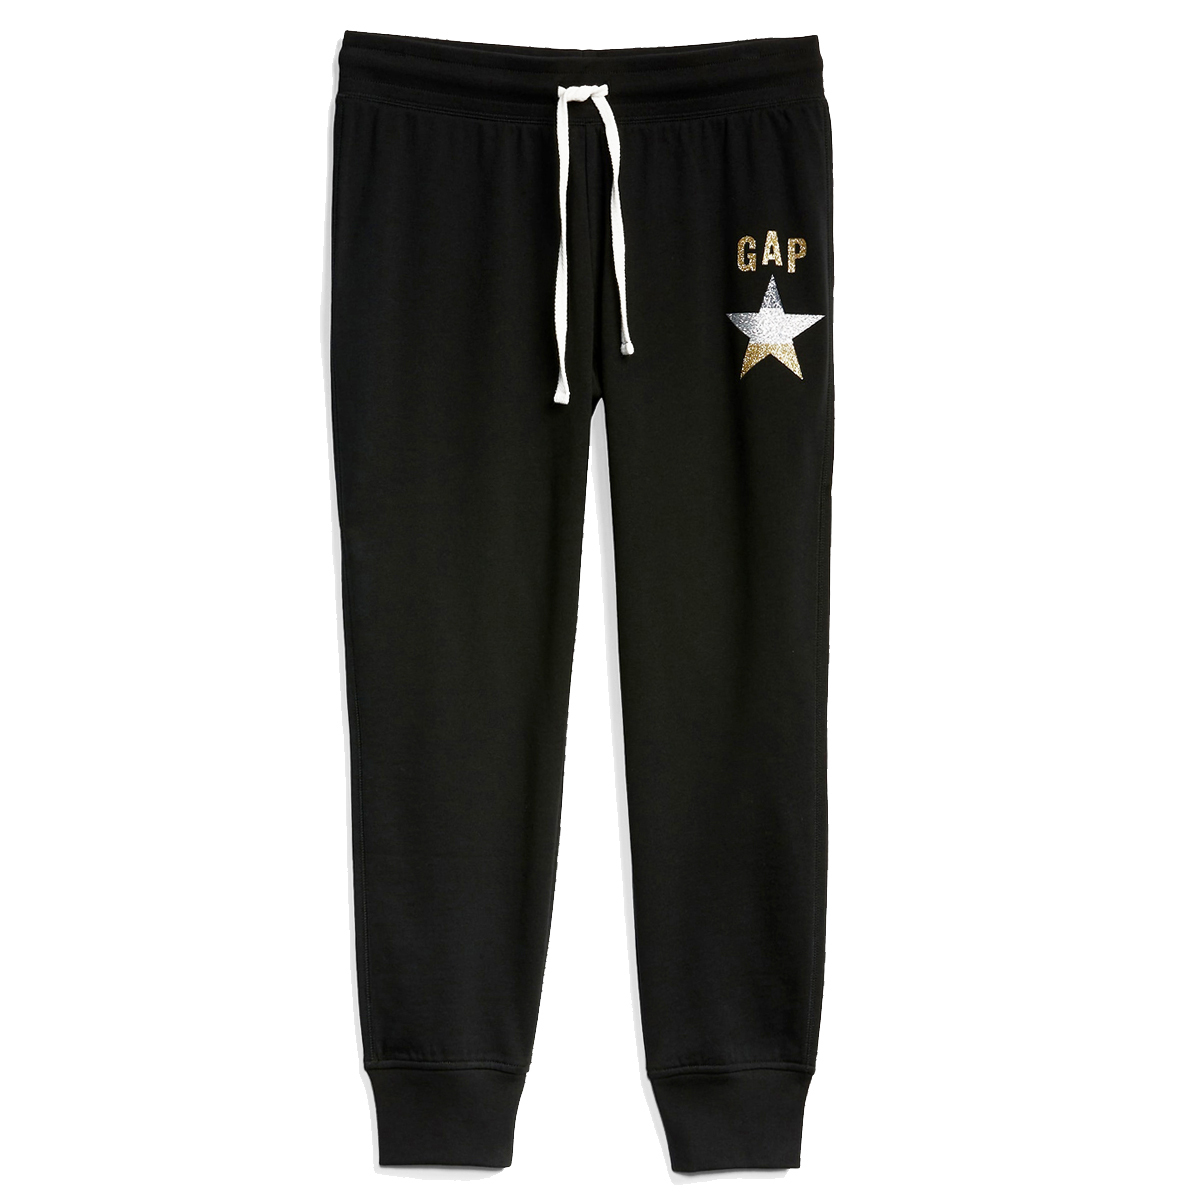 Gap Soft Fleece Knitted Solid Color Jogger with Metallic Glitter Logo  - Black